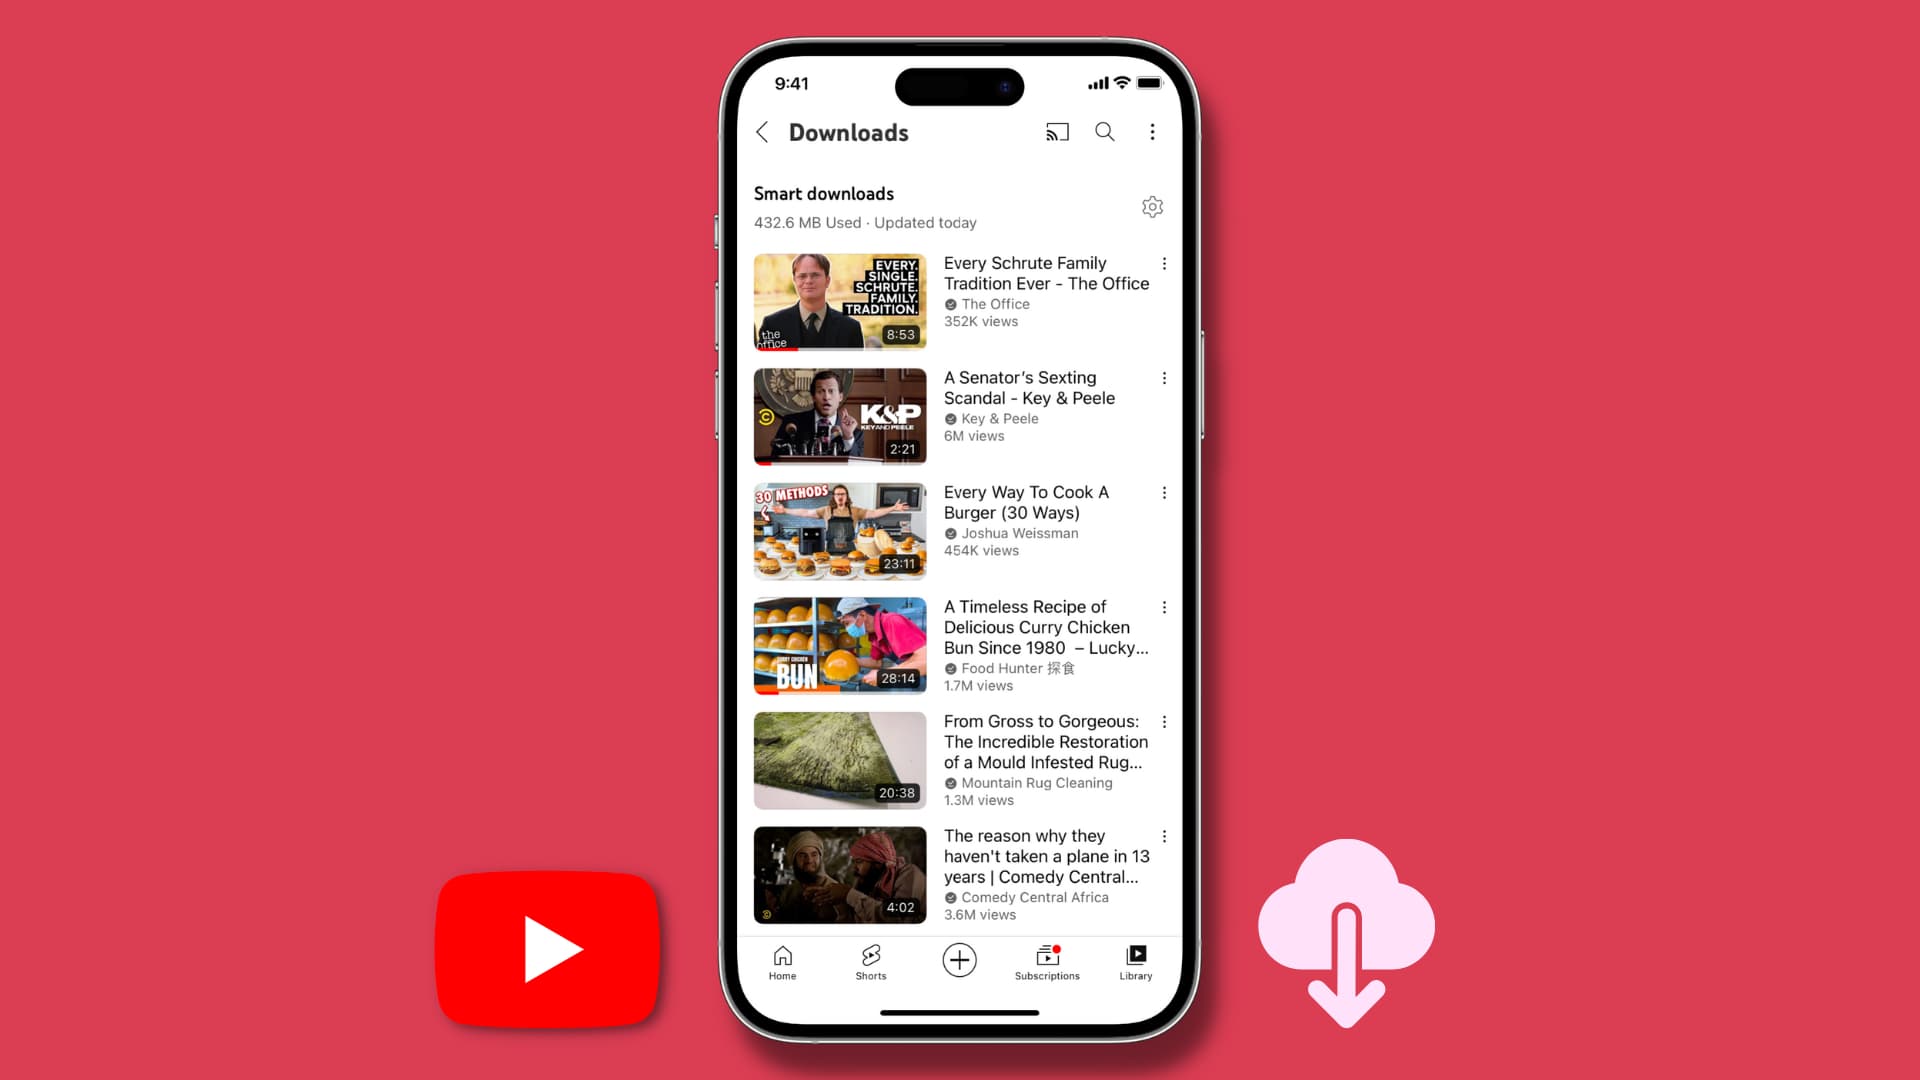 YouTube Smart downloads on iPhone with offline videos